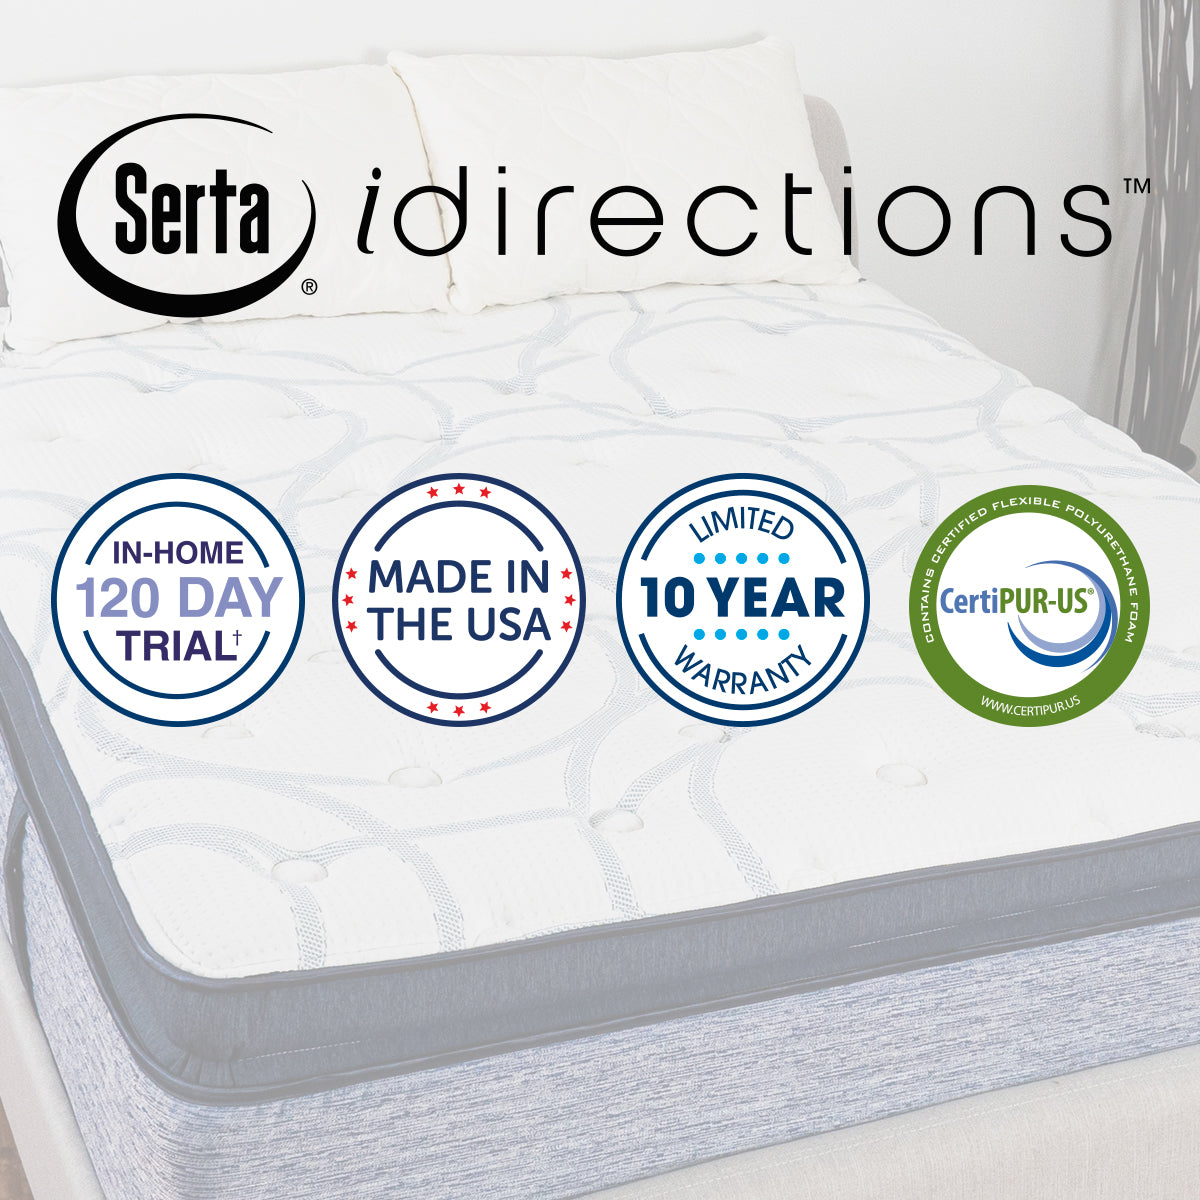 Serta iDirections X5 Hybrid II Plush Pillow Top Mattress Product Features: In-Home 120 Day Trial, Made in the USA, Limited 10 Year Warranty, CertiPUR-US Certified